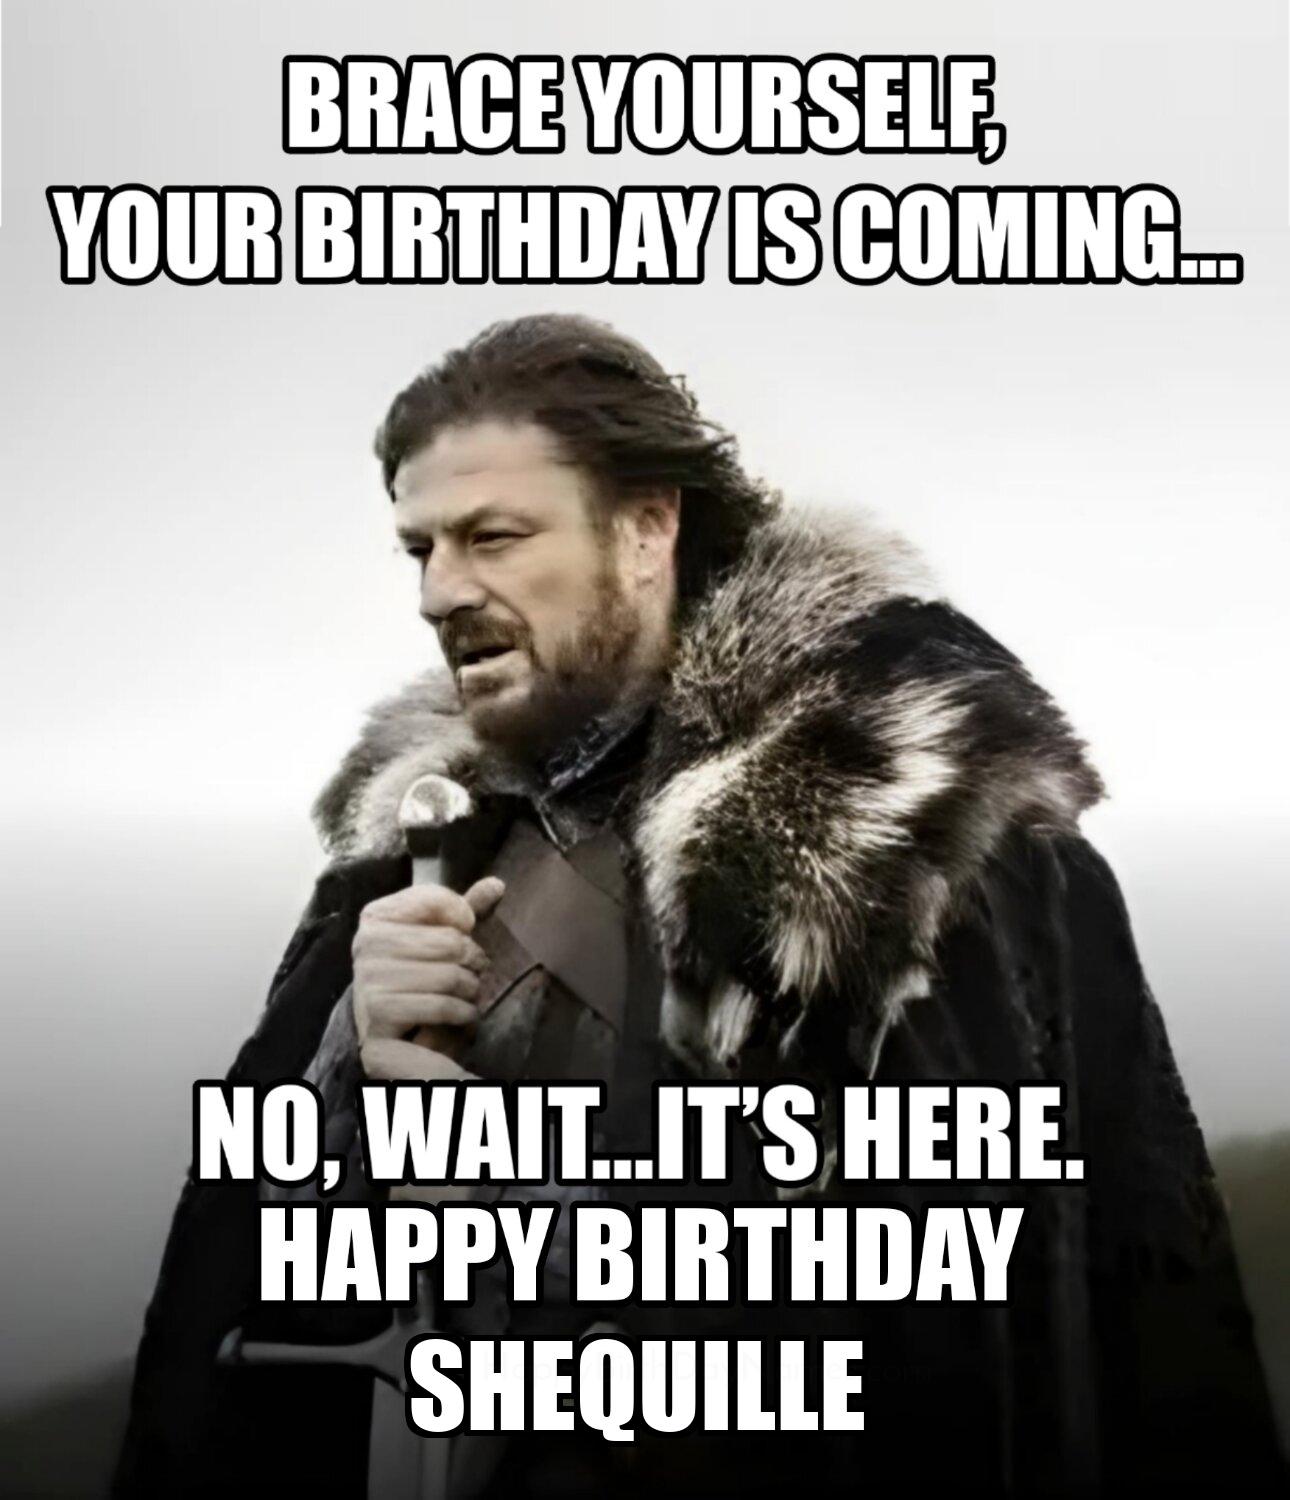 Happy Birthday Shequille Brace Yourself Your Birthday Is Coming Meme